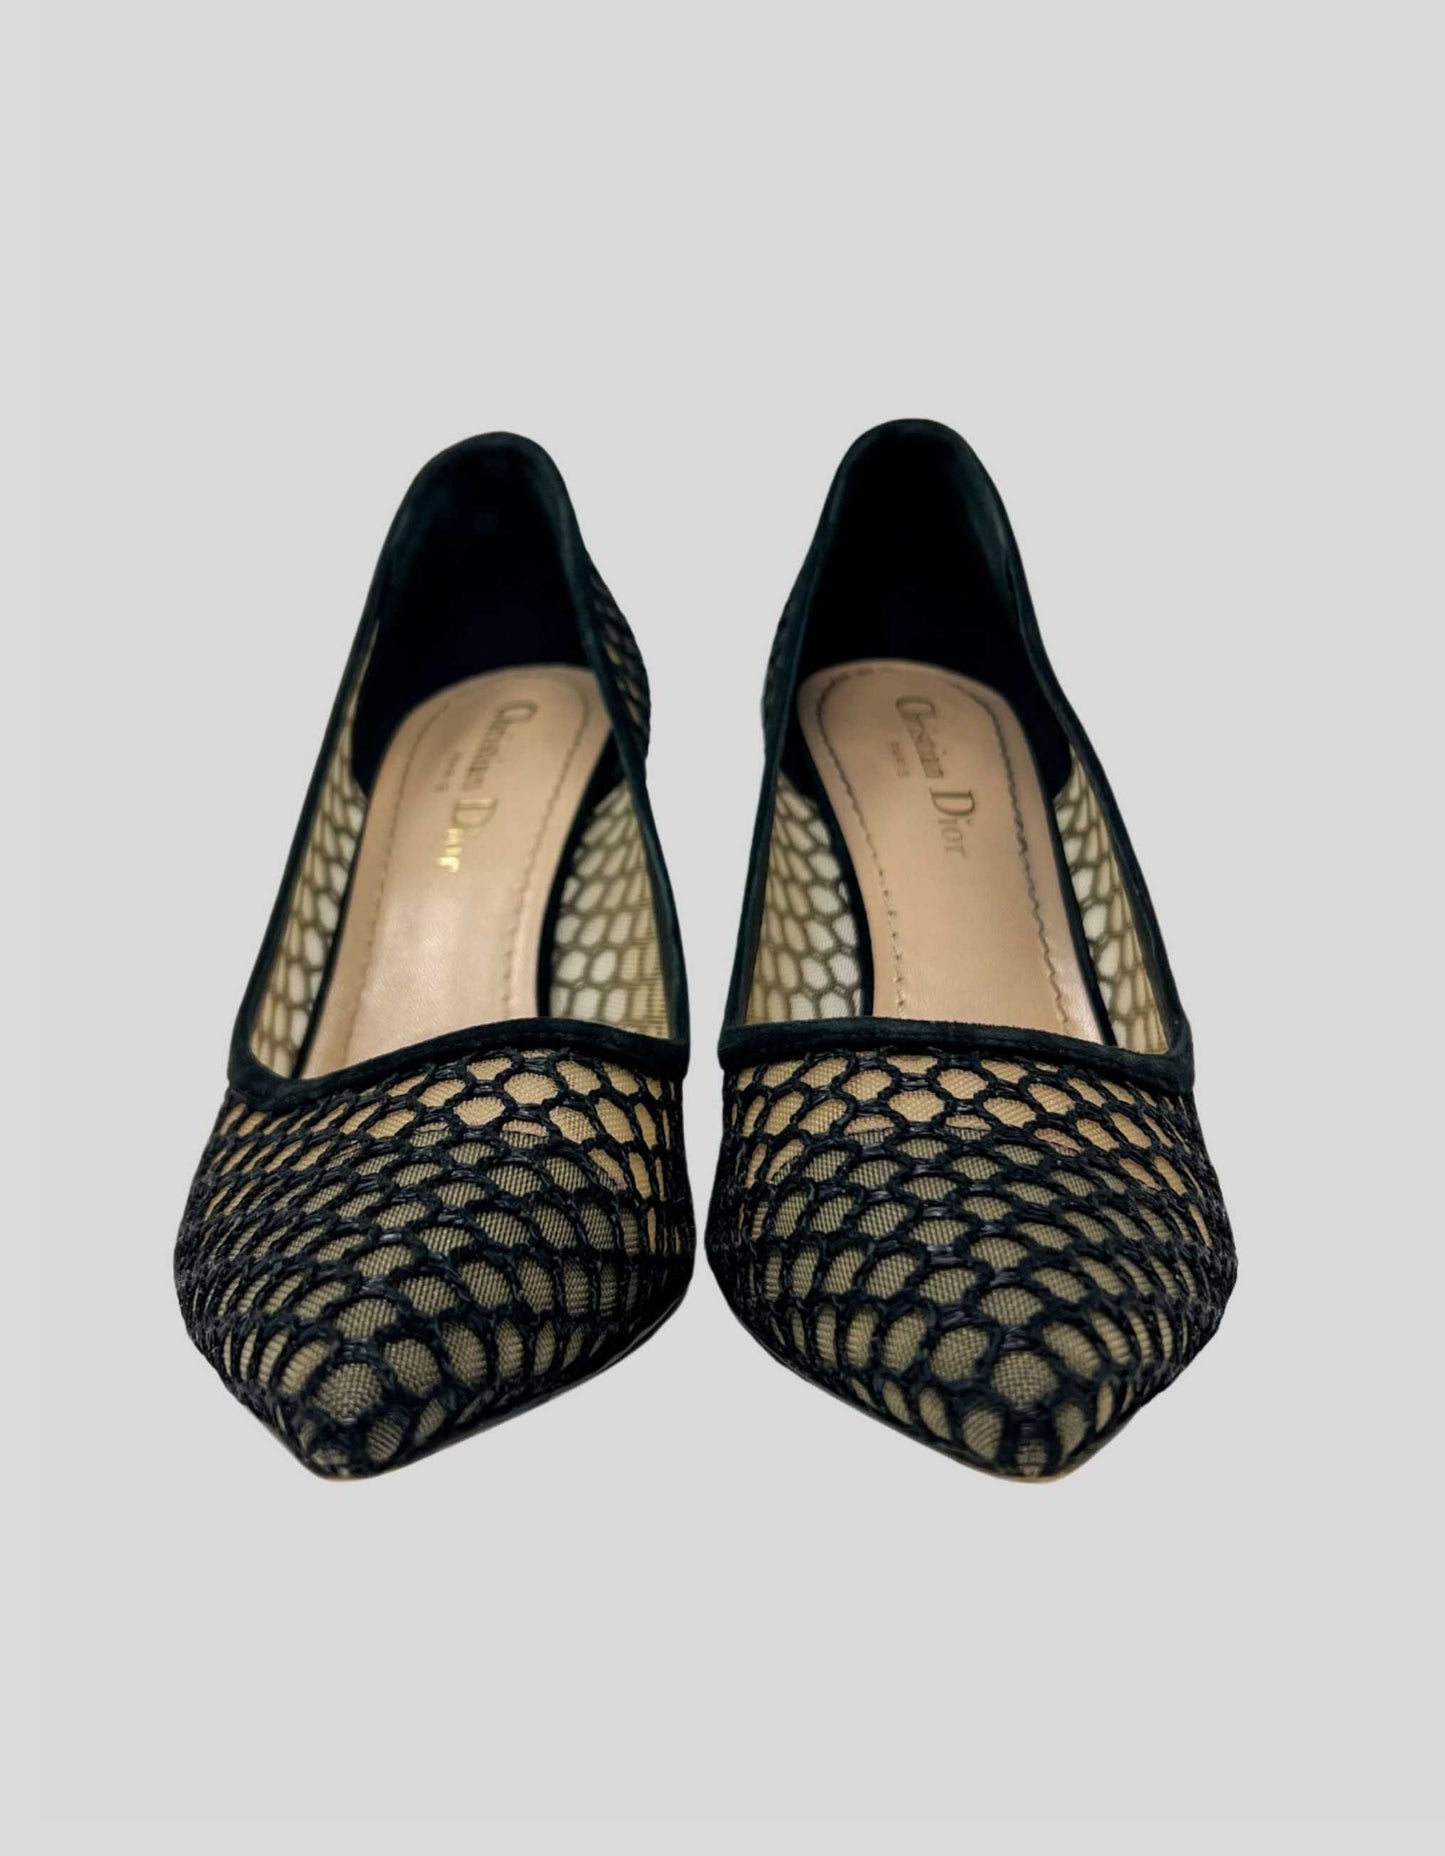 CHRISTIAN DIOR Black Suede and Mesh Pointed Toe Pumps - 9 US | 39 IT